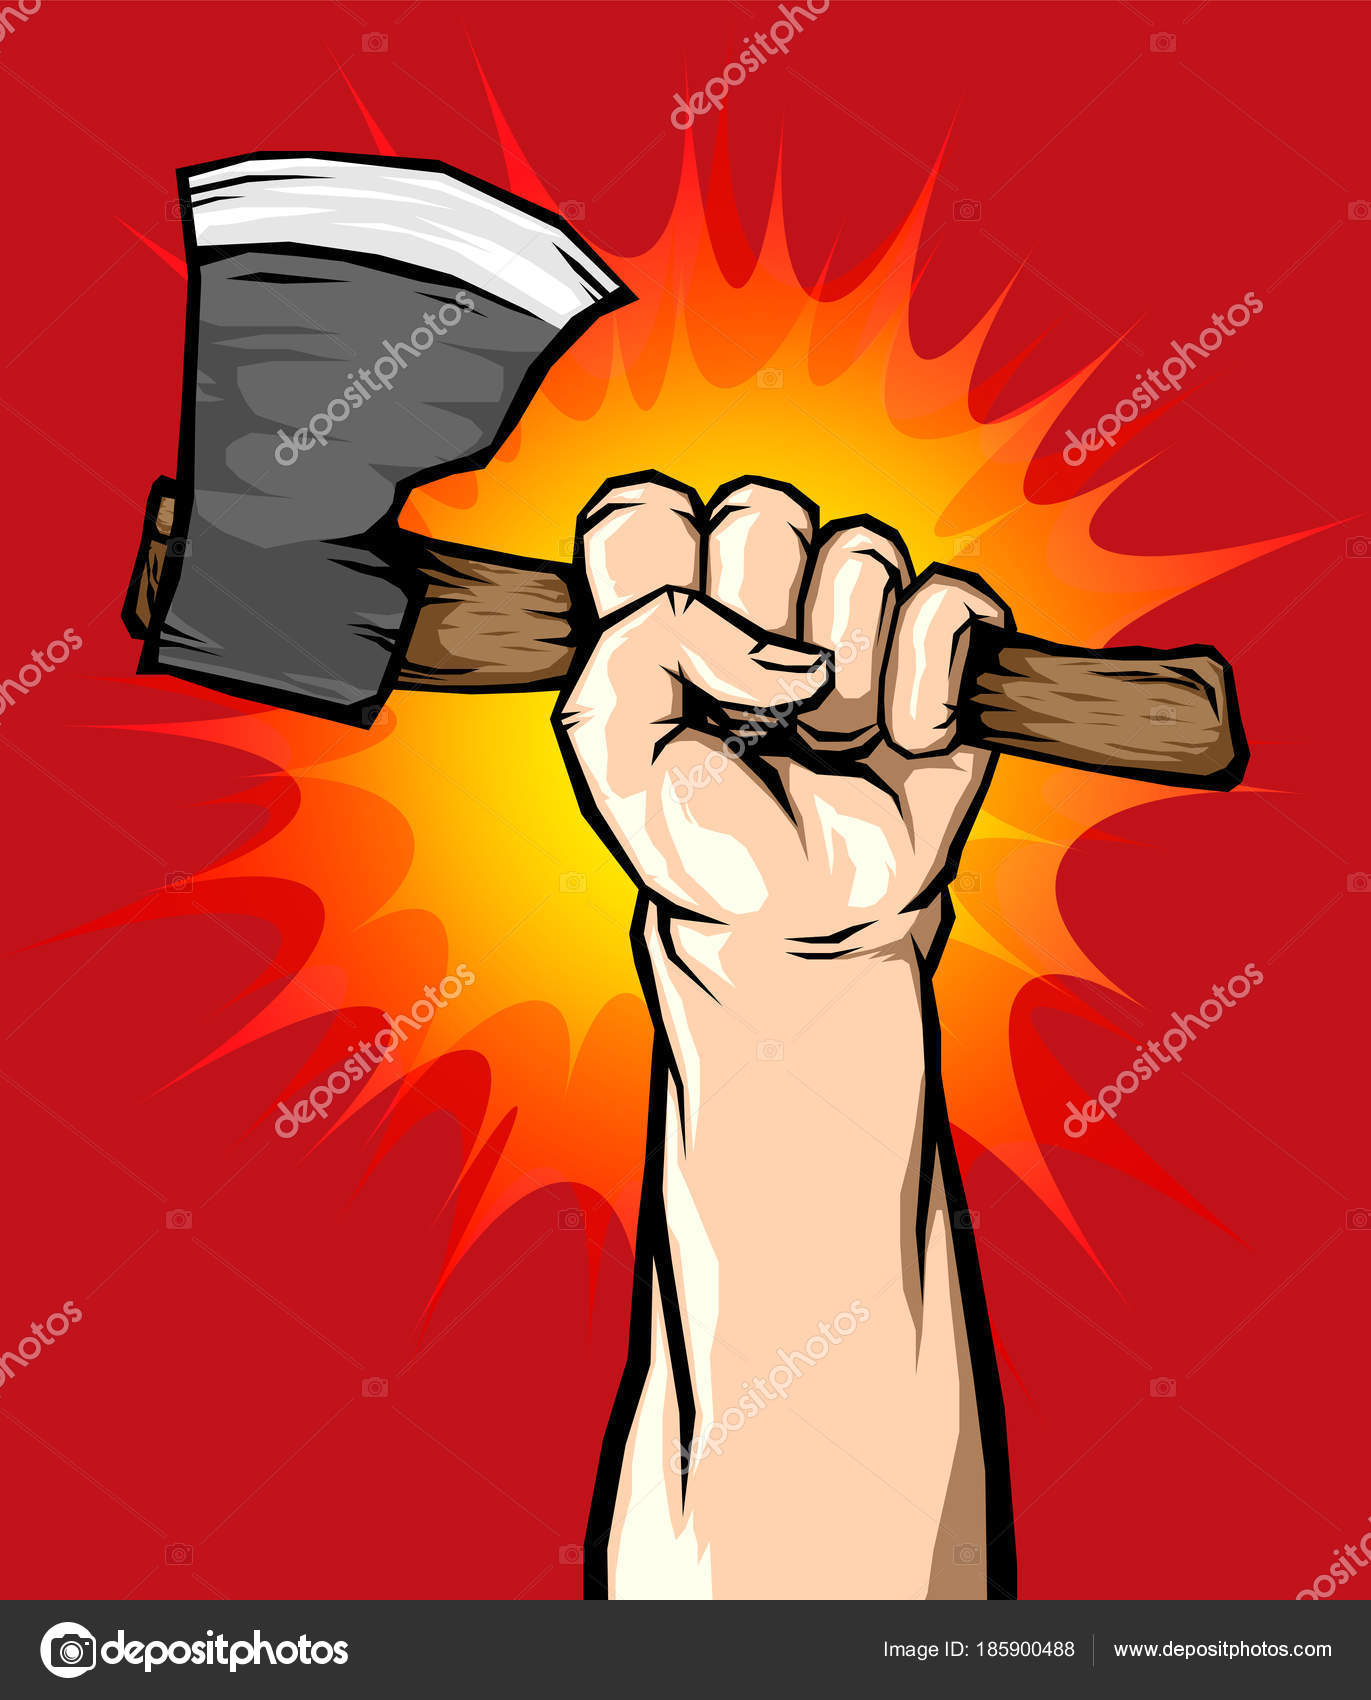 Ontleden Universeel Bron Male Hand Holding Axe Air Illustration Vector Stock Vector Image by  ©thaiprayboy@hotmail.com #185900488